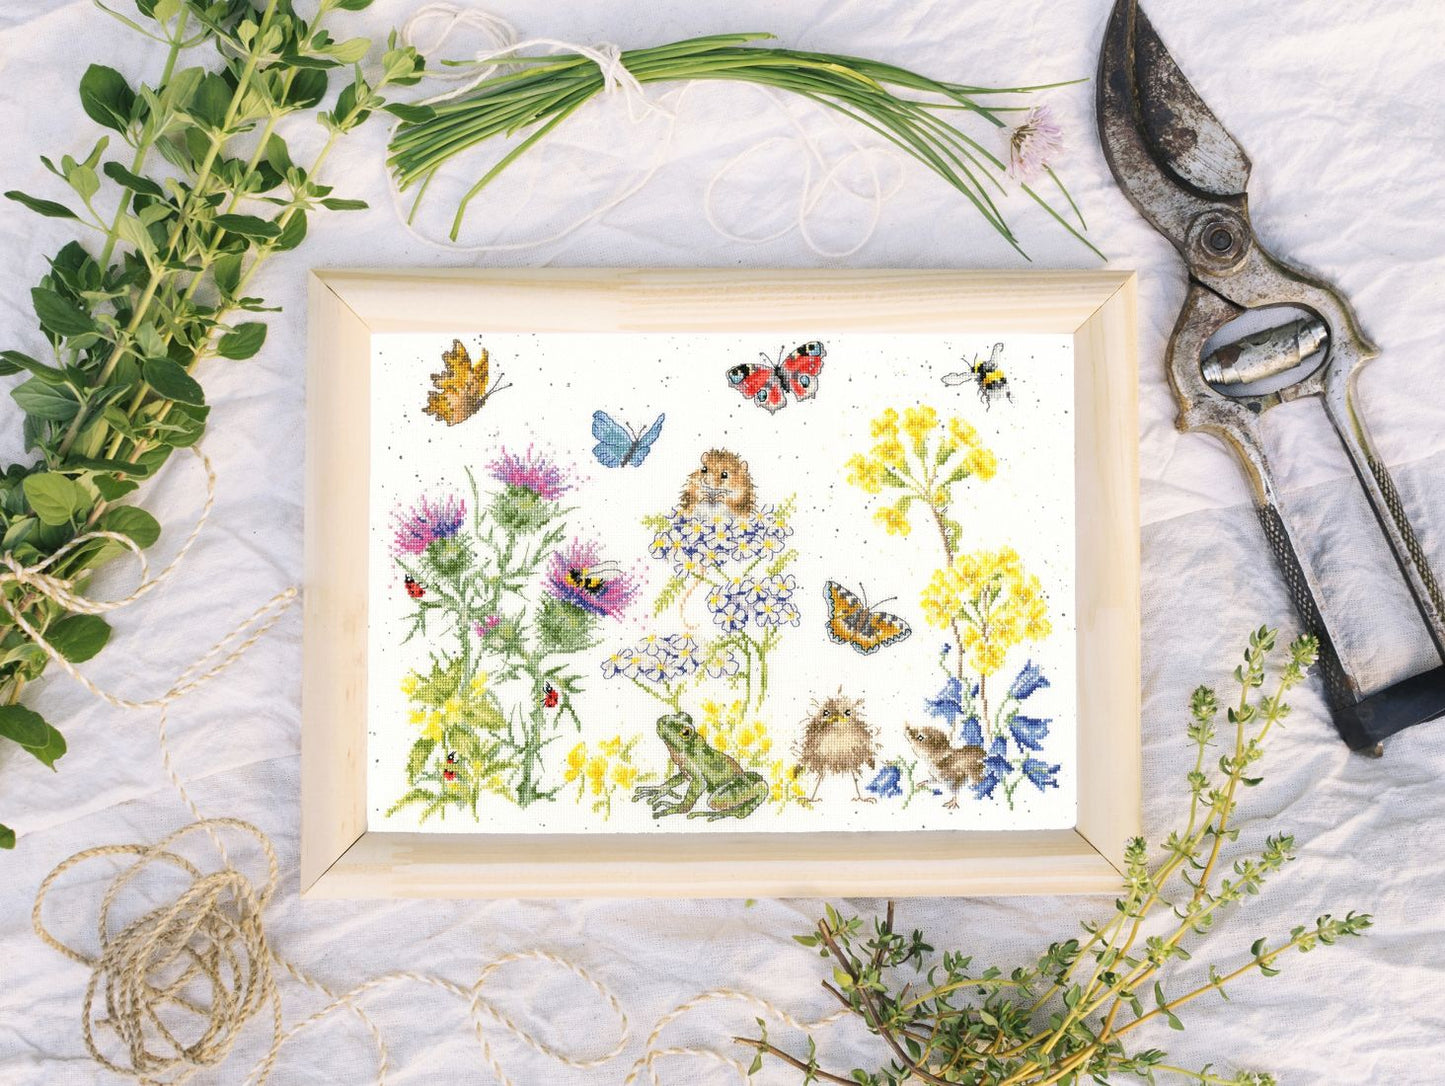 Wildflower Memories - Counted Cross Stitch Kit by Bothy Threads